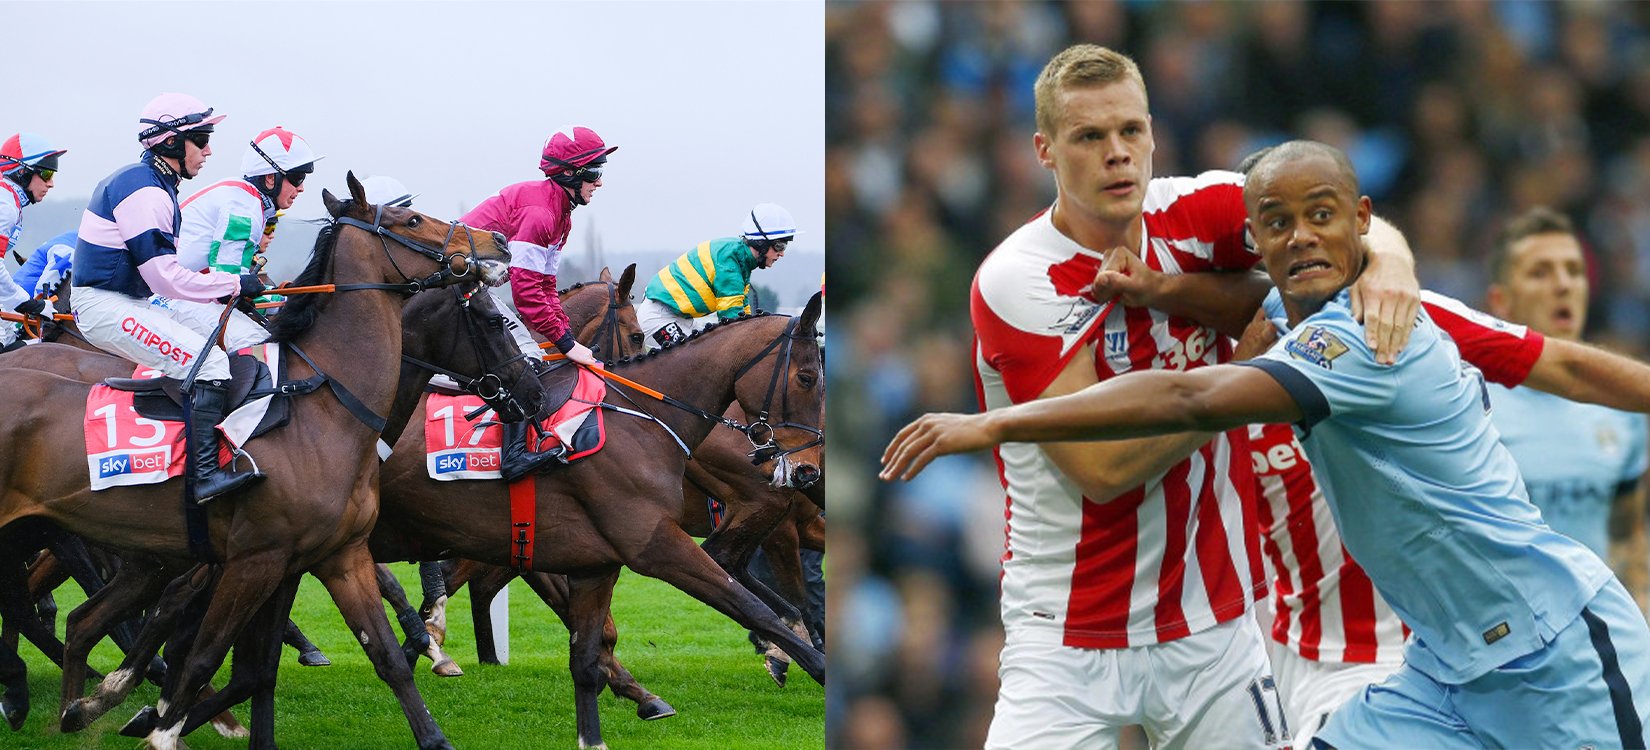 11 popular phrases that come from horse racing - Great British Racing